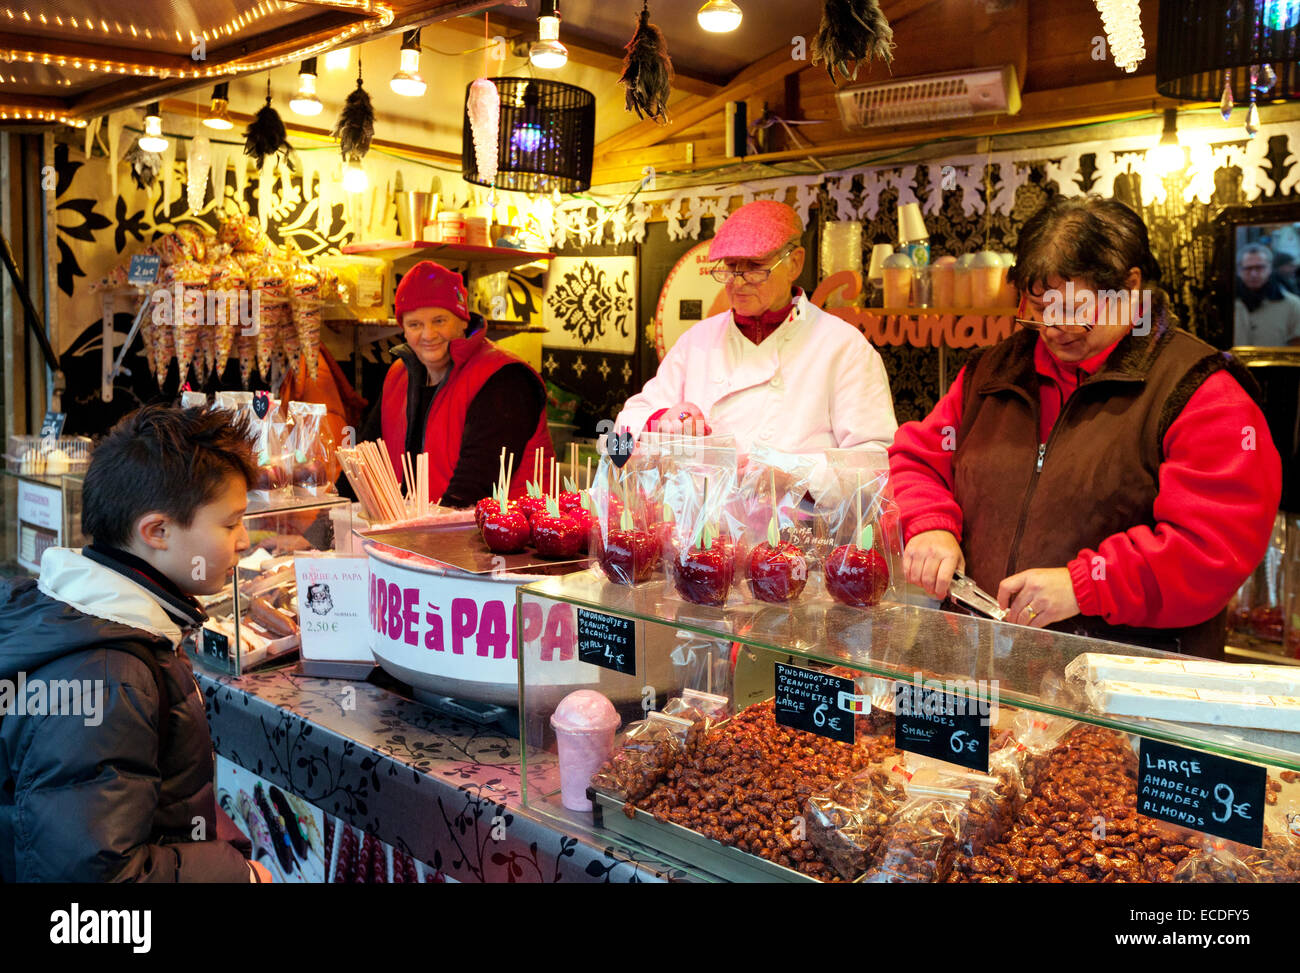 A young boy child buying a toffee apple at a stall, Bruges Christmas Market, Markt Square, Bruges, Belgium, Europe Stock Photo